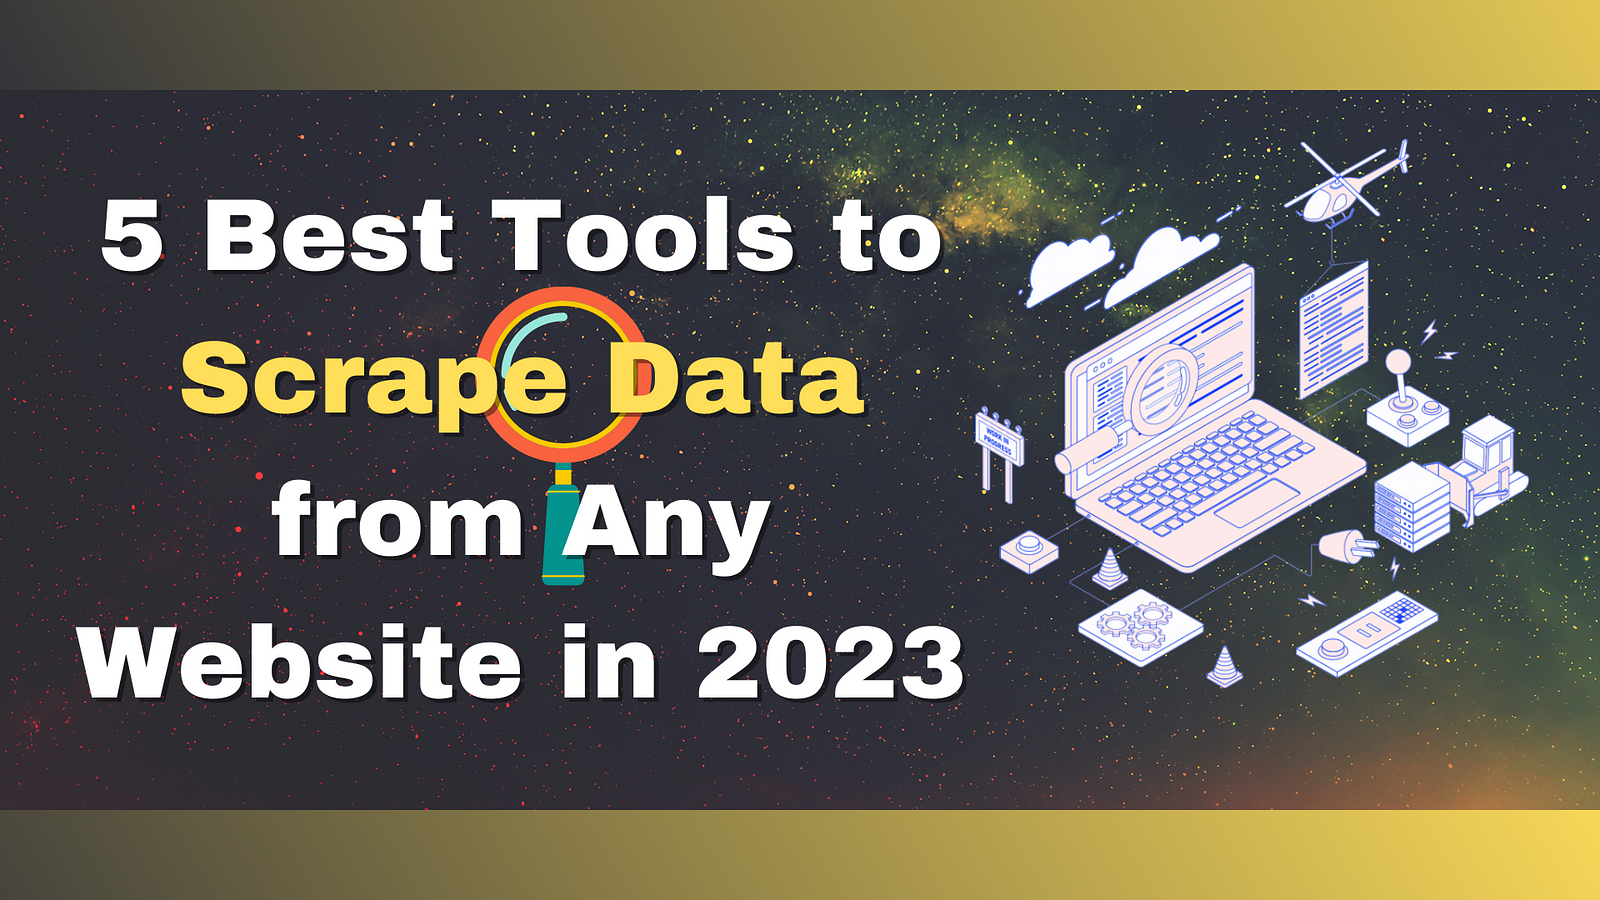 5 Best Tools to Scrape Data from Any Website in 2023